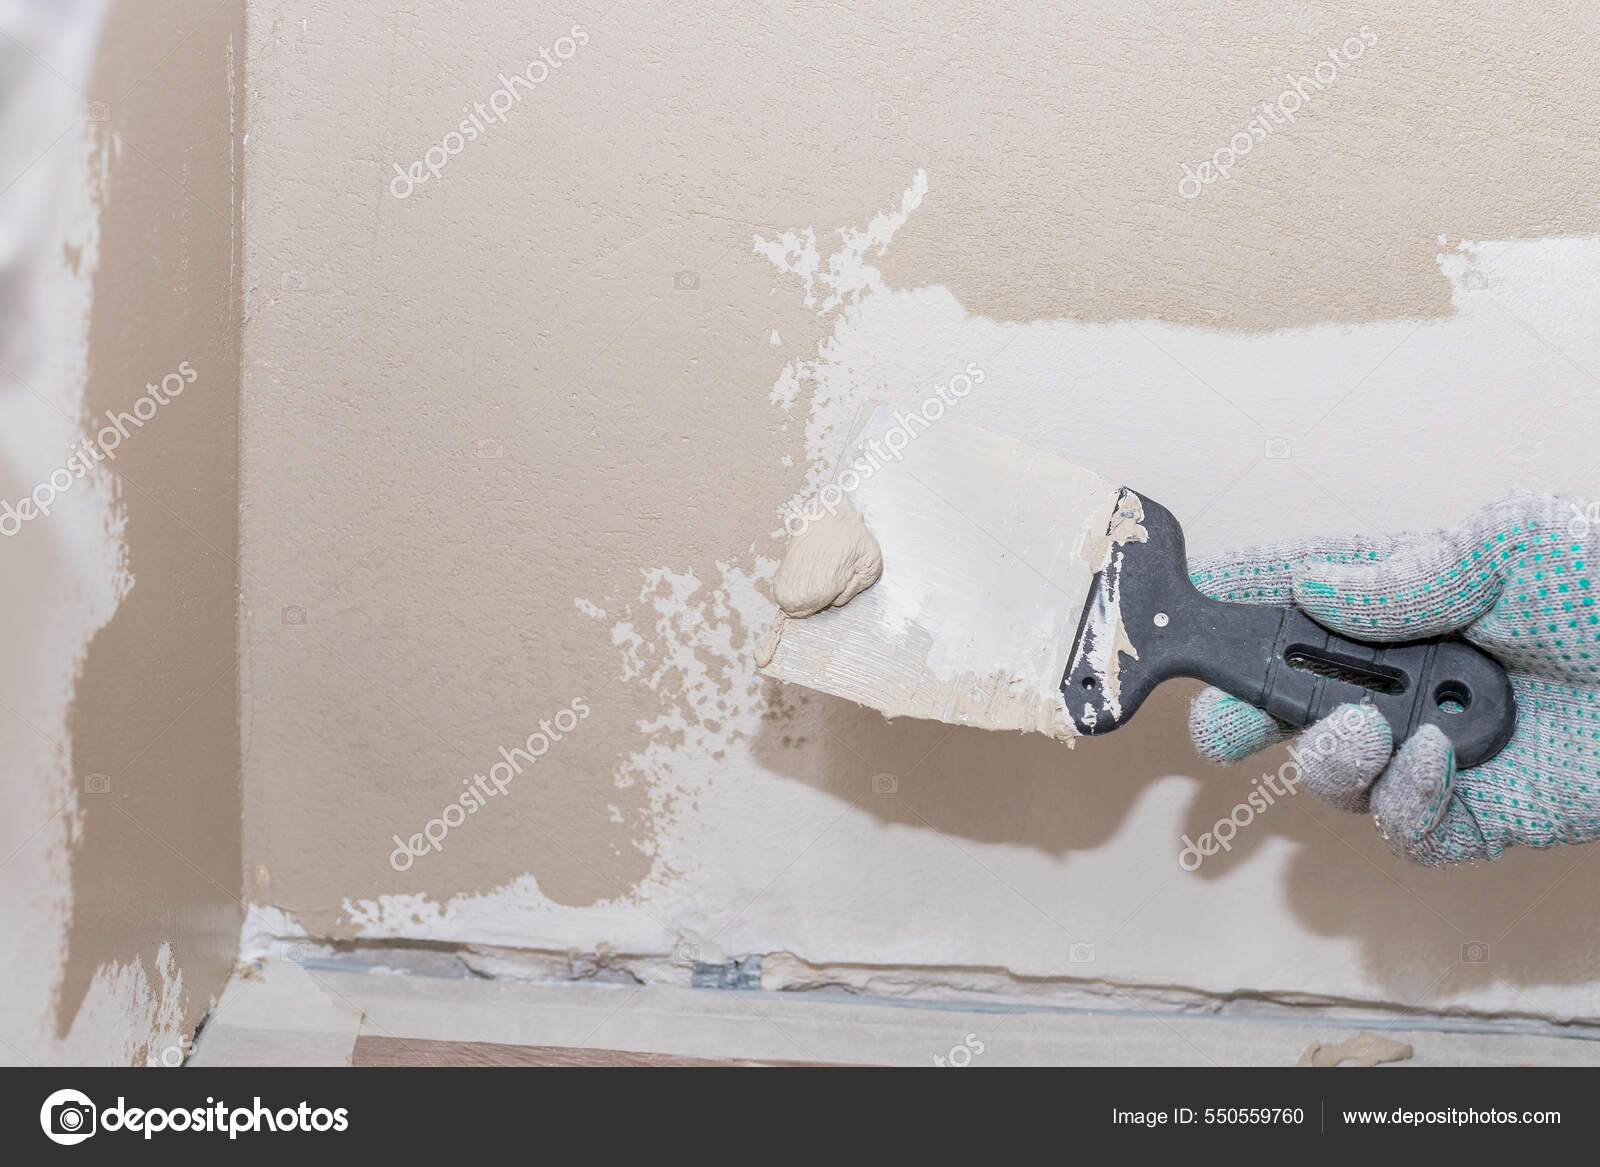 Painting & Plastering Accessories - Wall Painting Accessories and Wall  Plastering Accessories